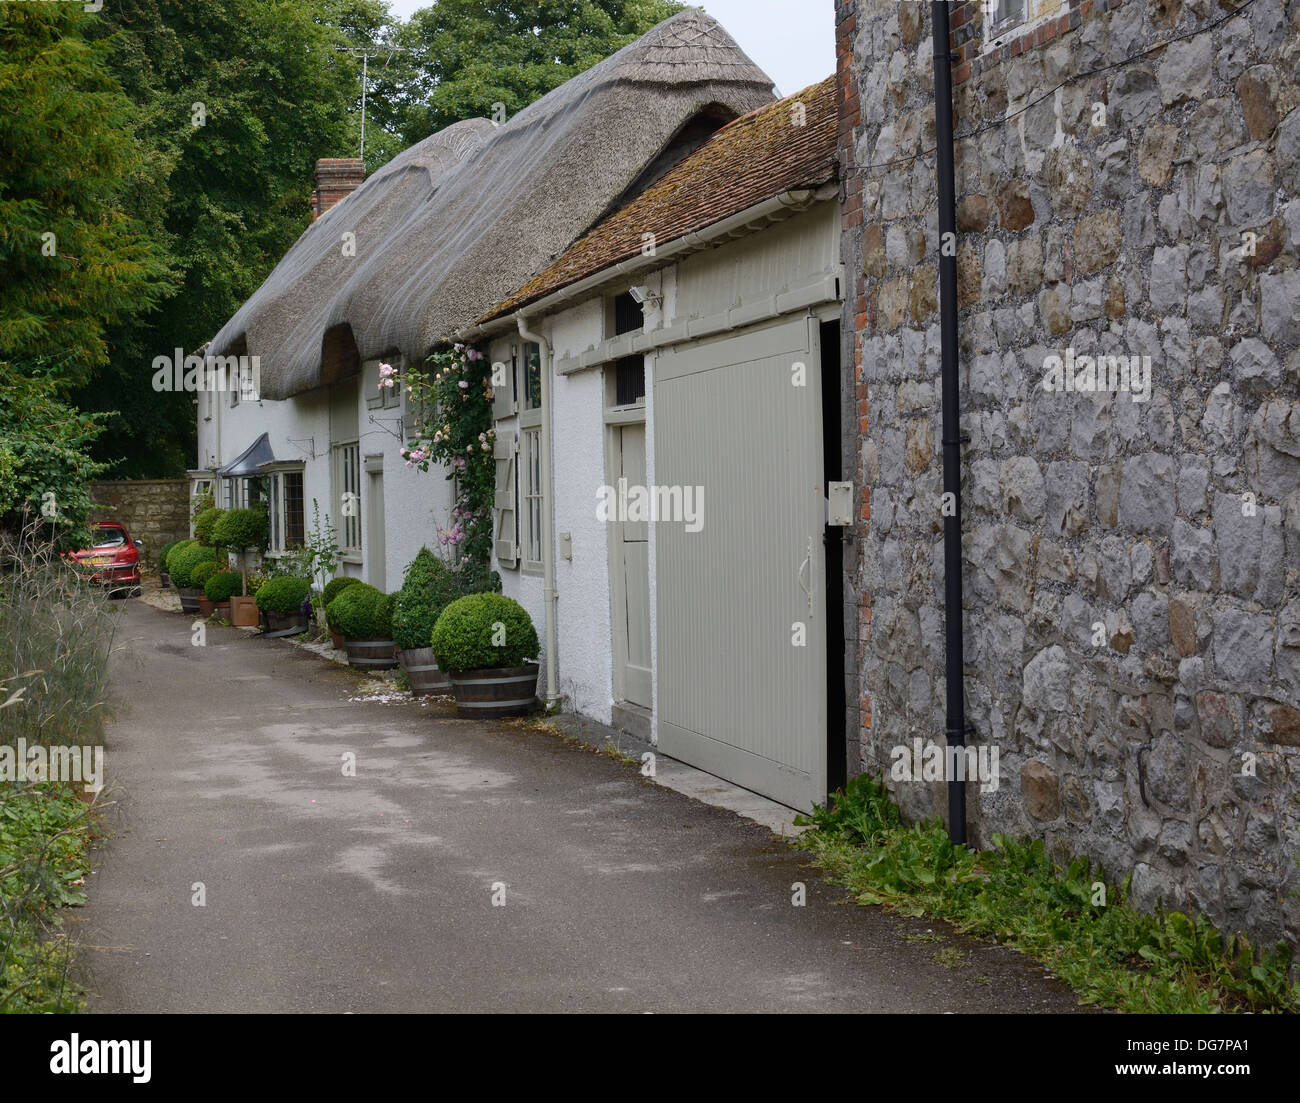 Typical Old English Country Cottages With Thatched Roof And